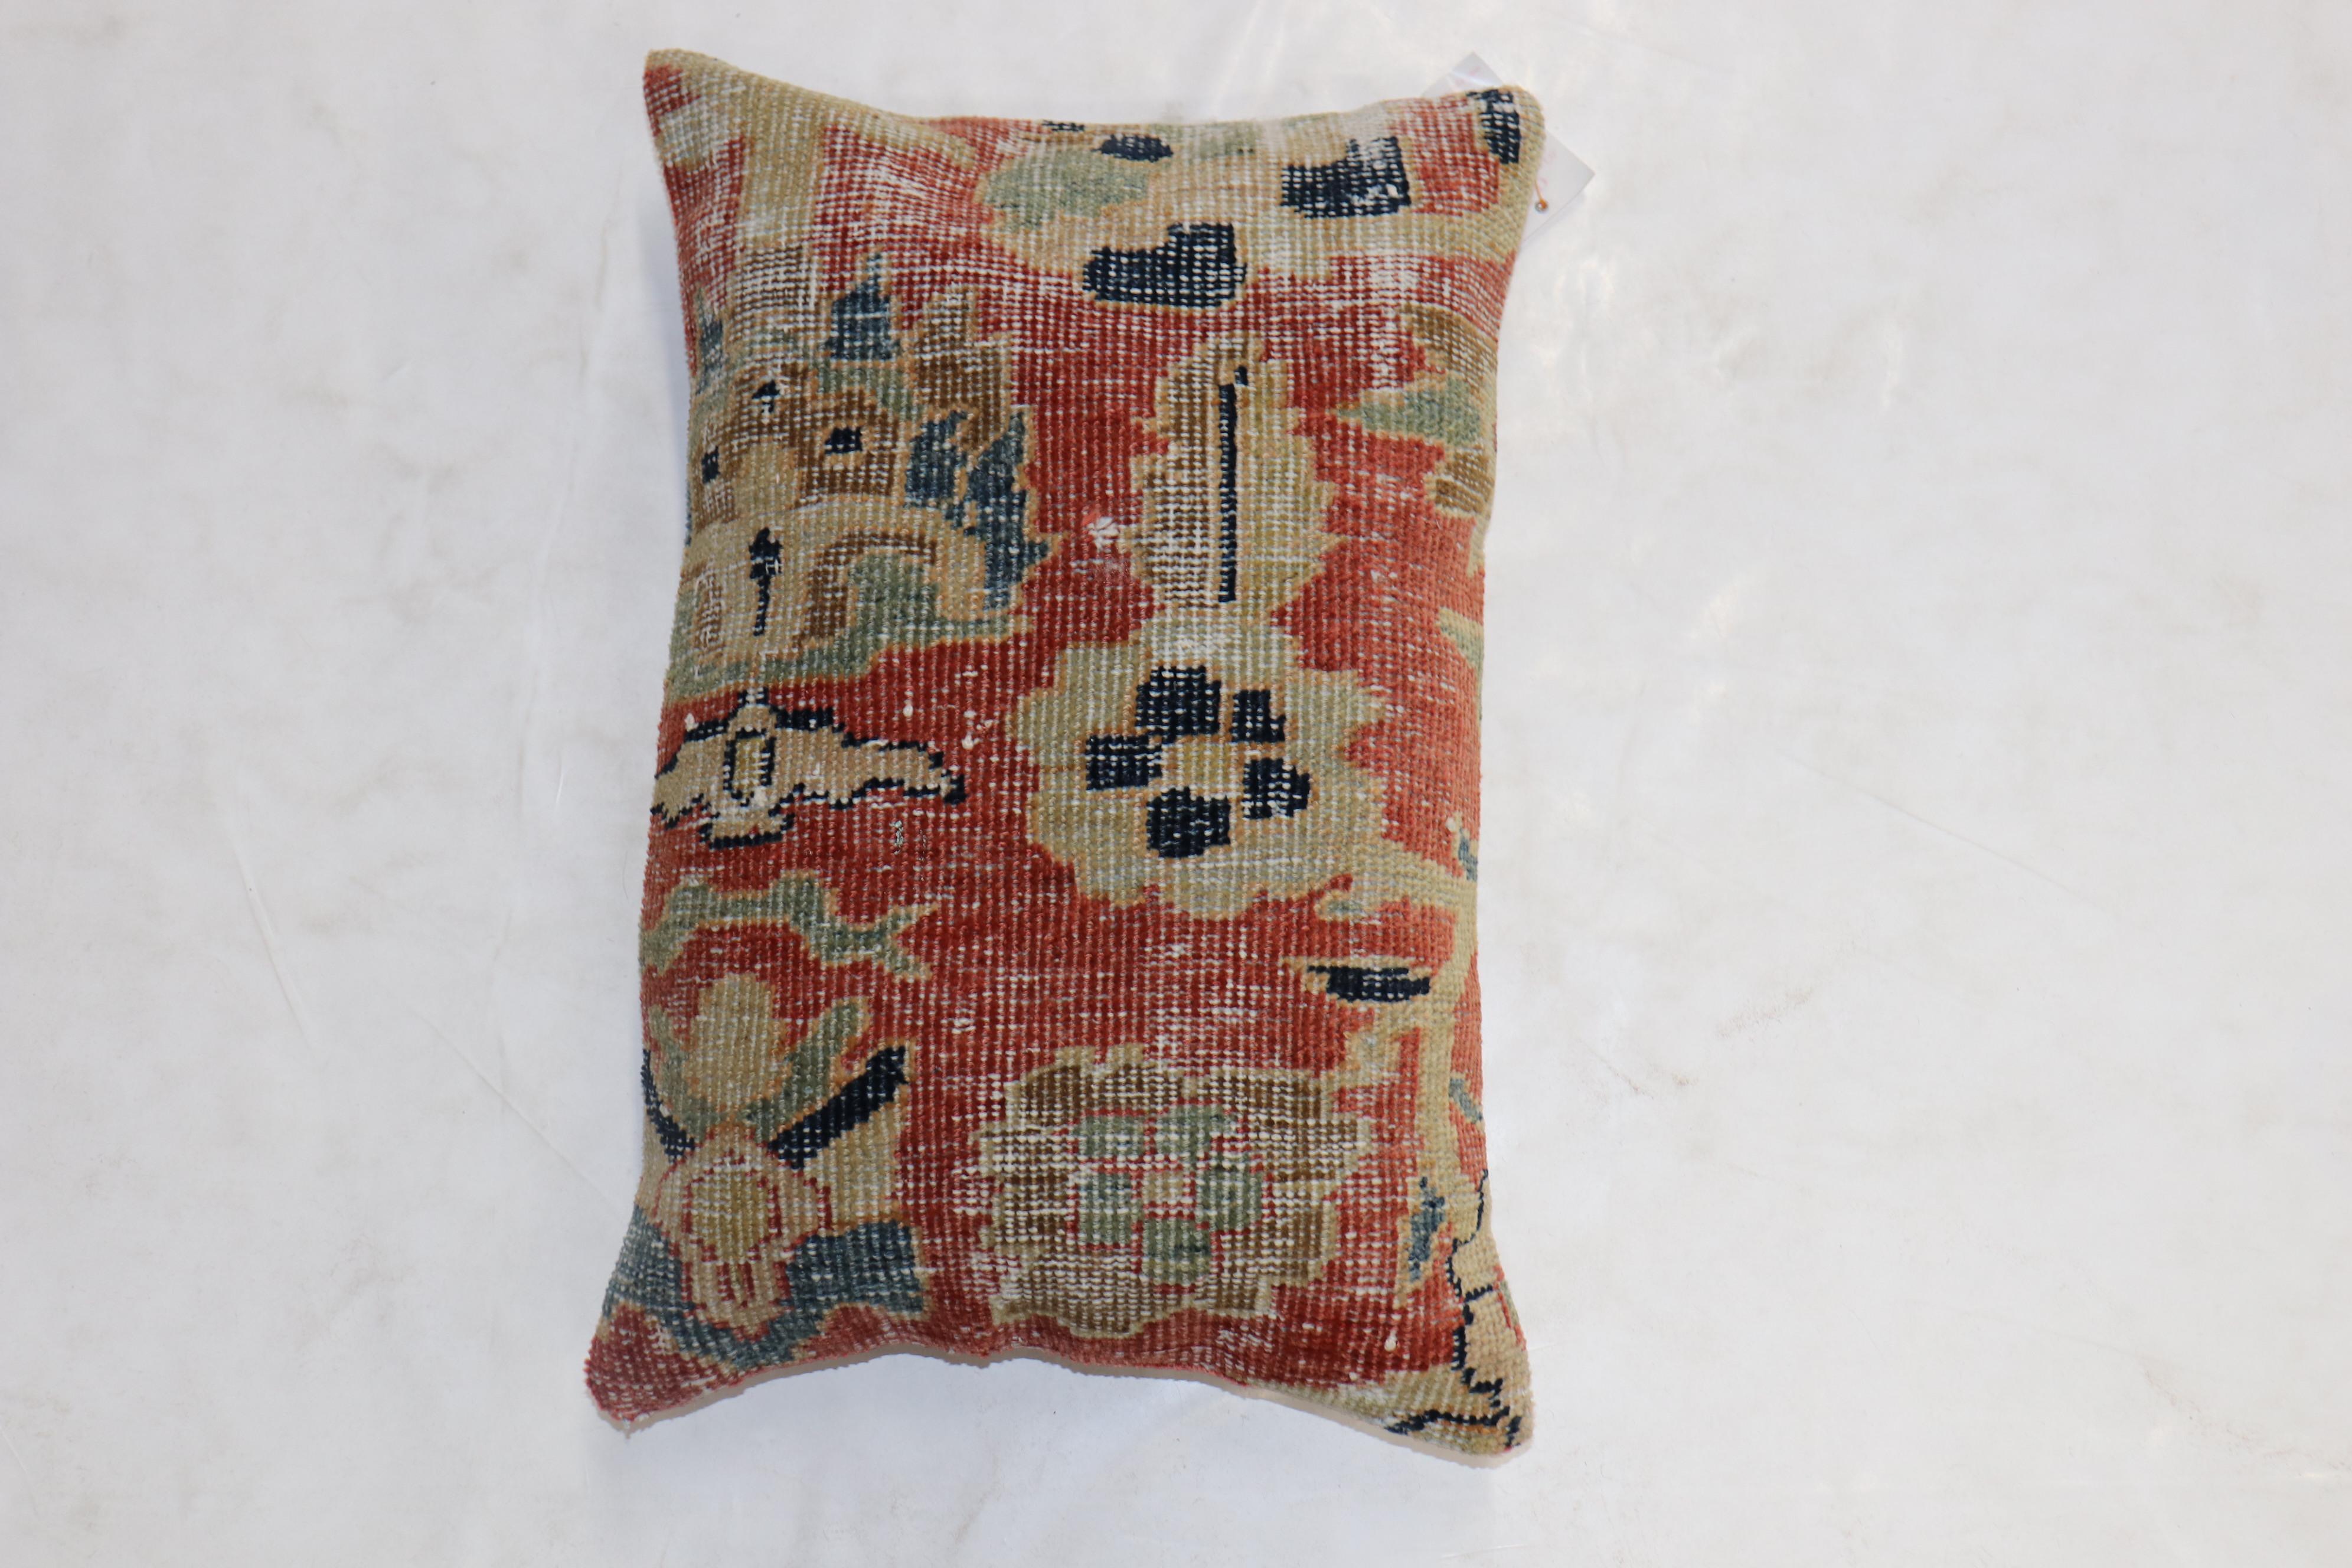 Set of pillows made from a 19th century terracotta color traditional Persian Mahal rug.
Measuring: 16